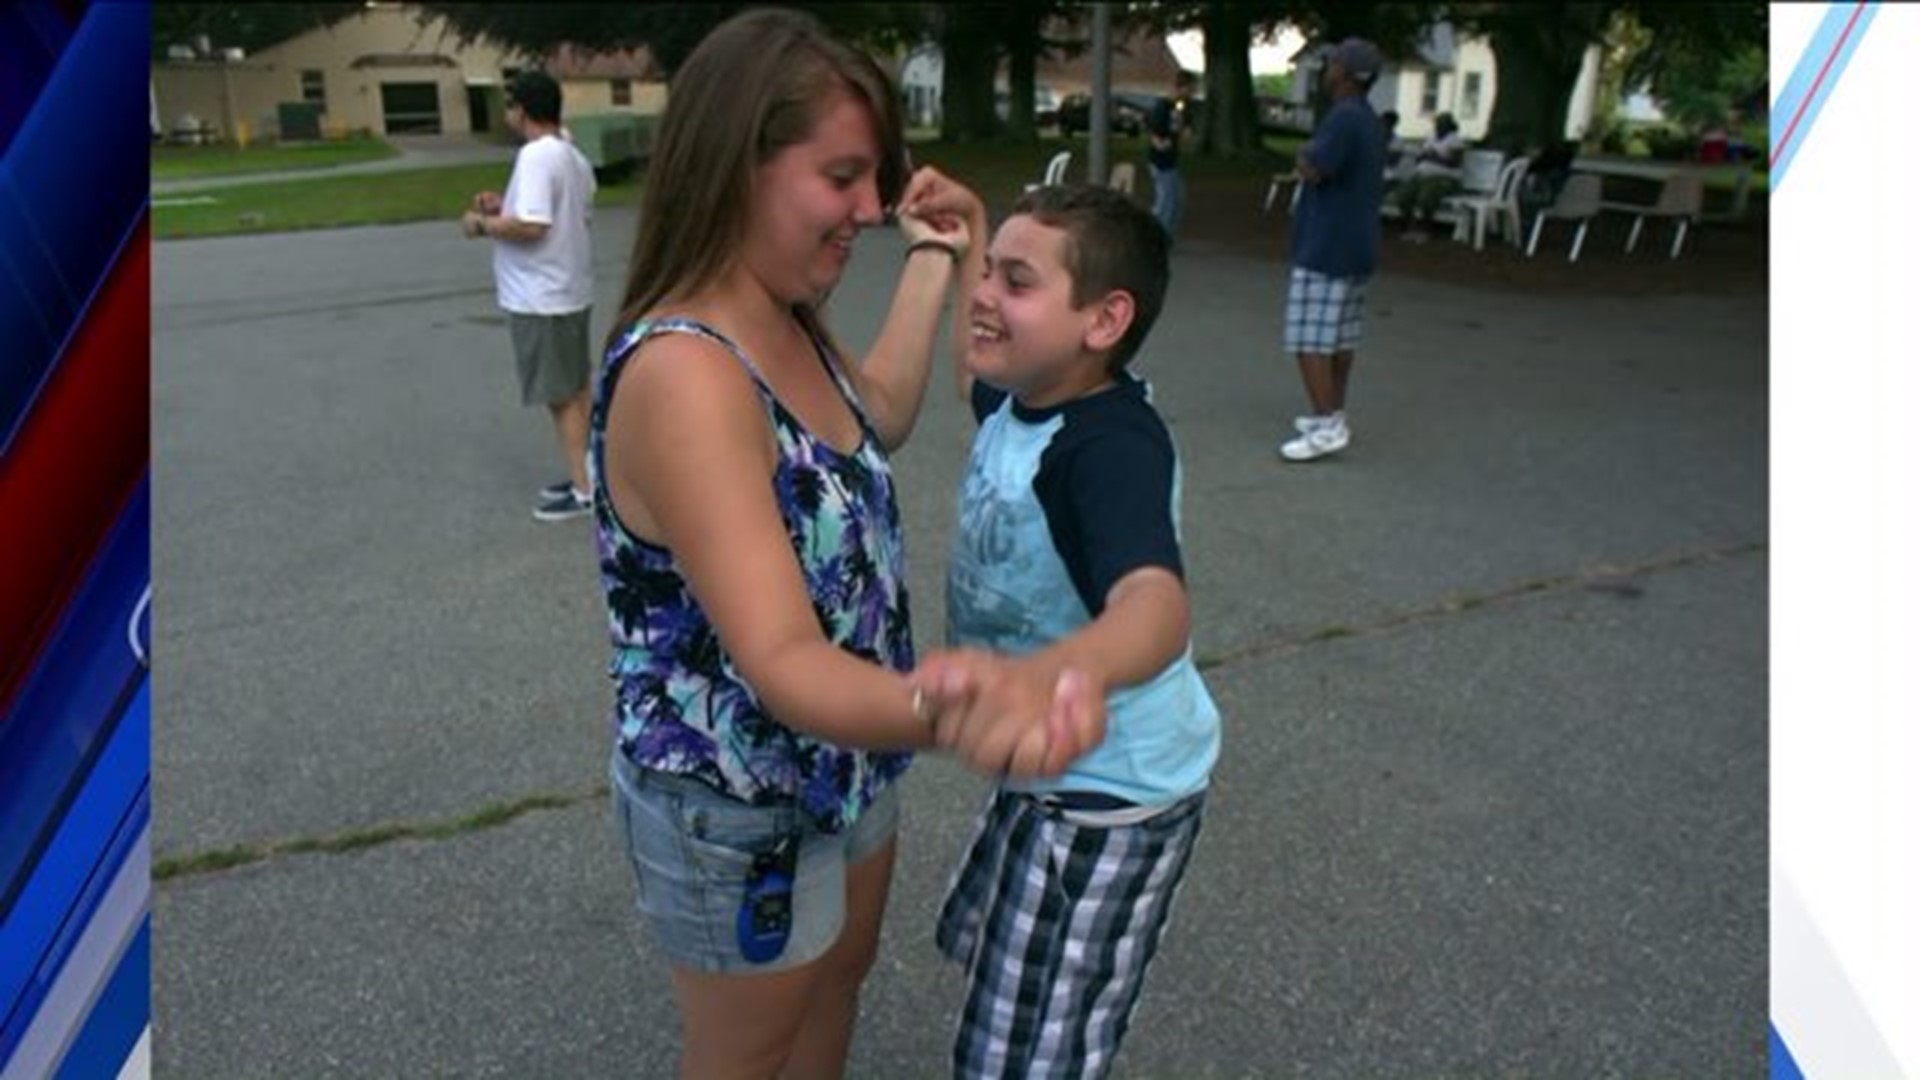 Camp Week: Summer programs for kids with special needs